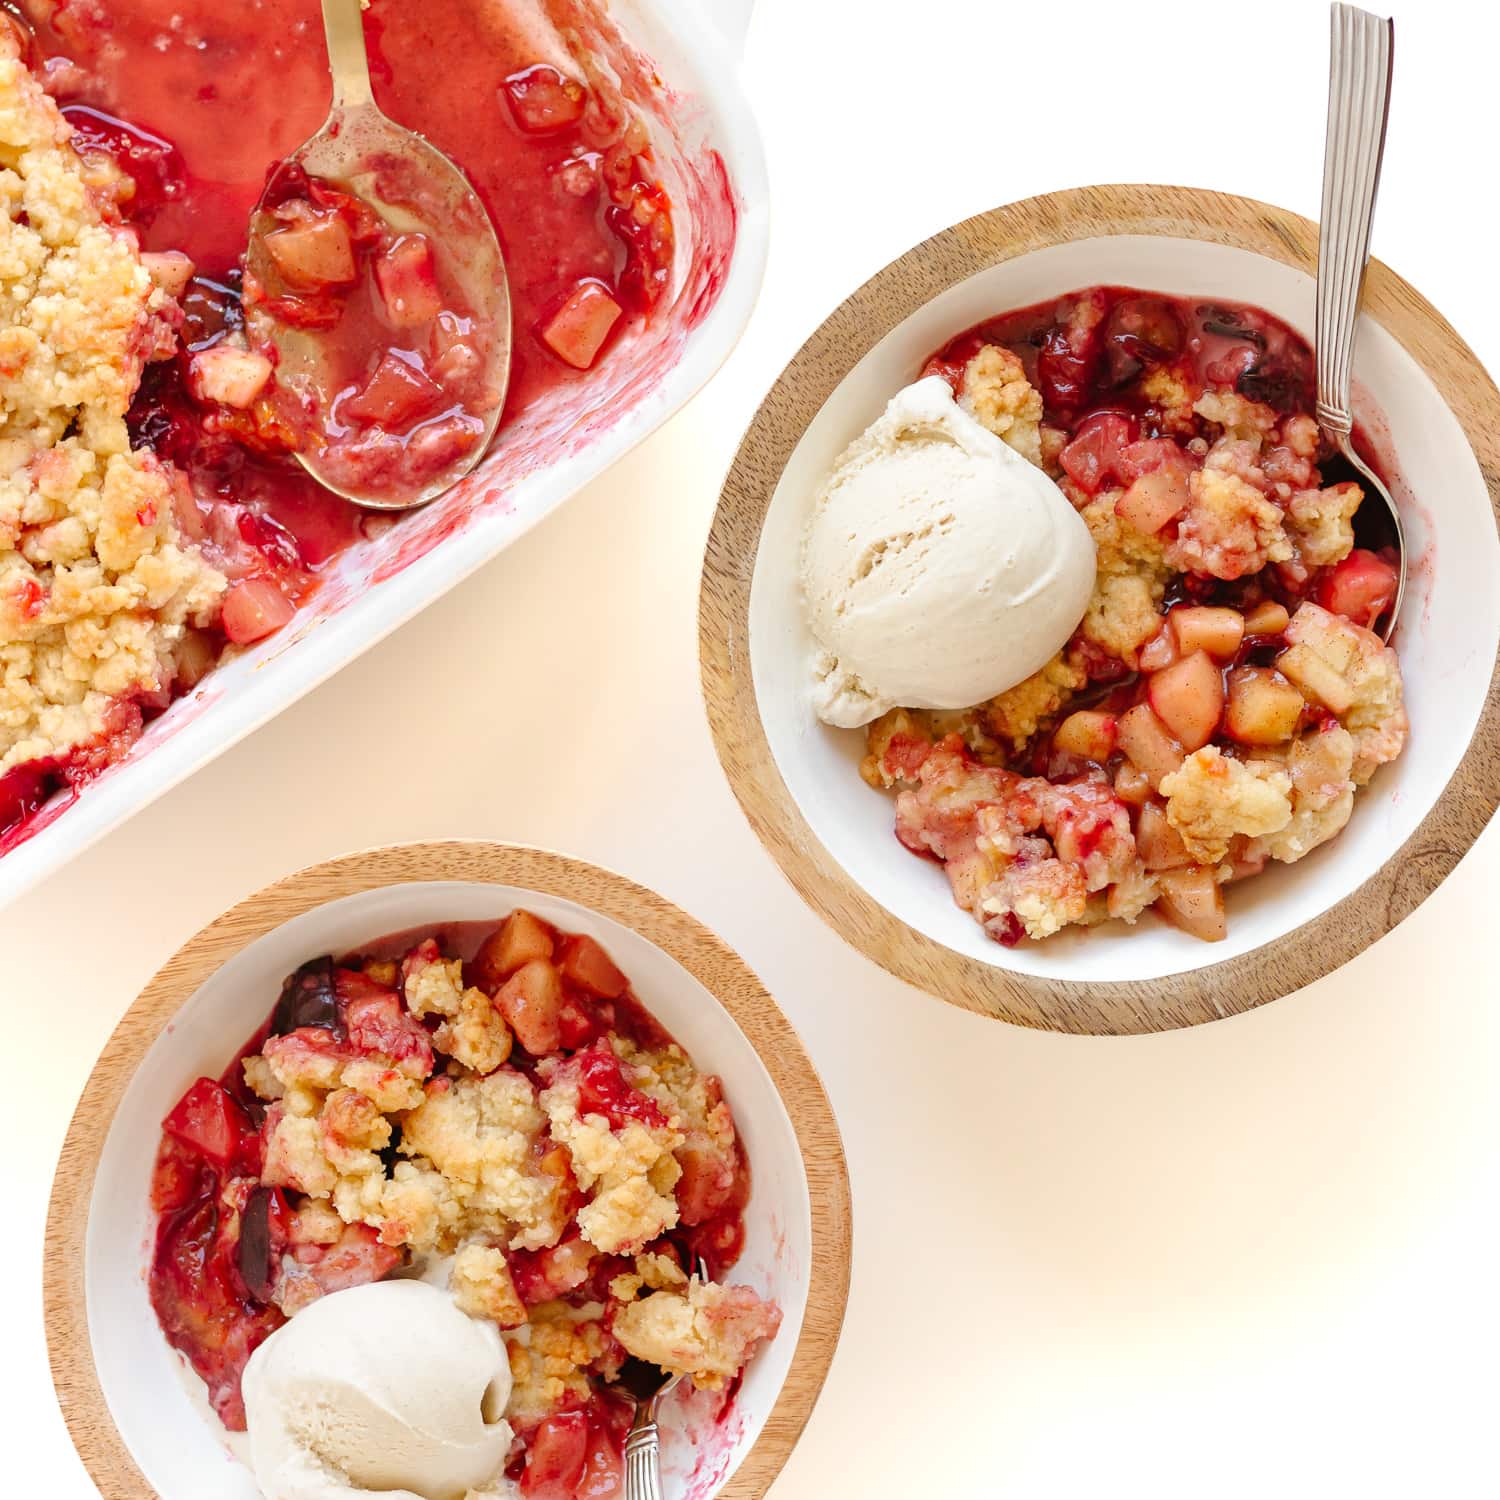 Plum apple crumble being served into two bowls with a scoop of vanilla ice cream.